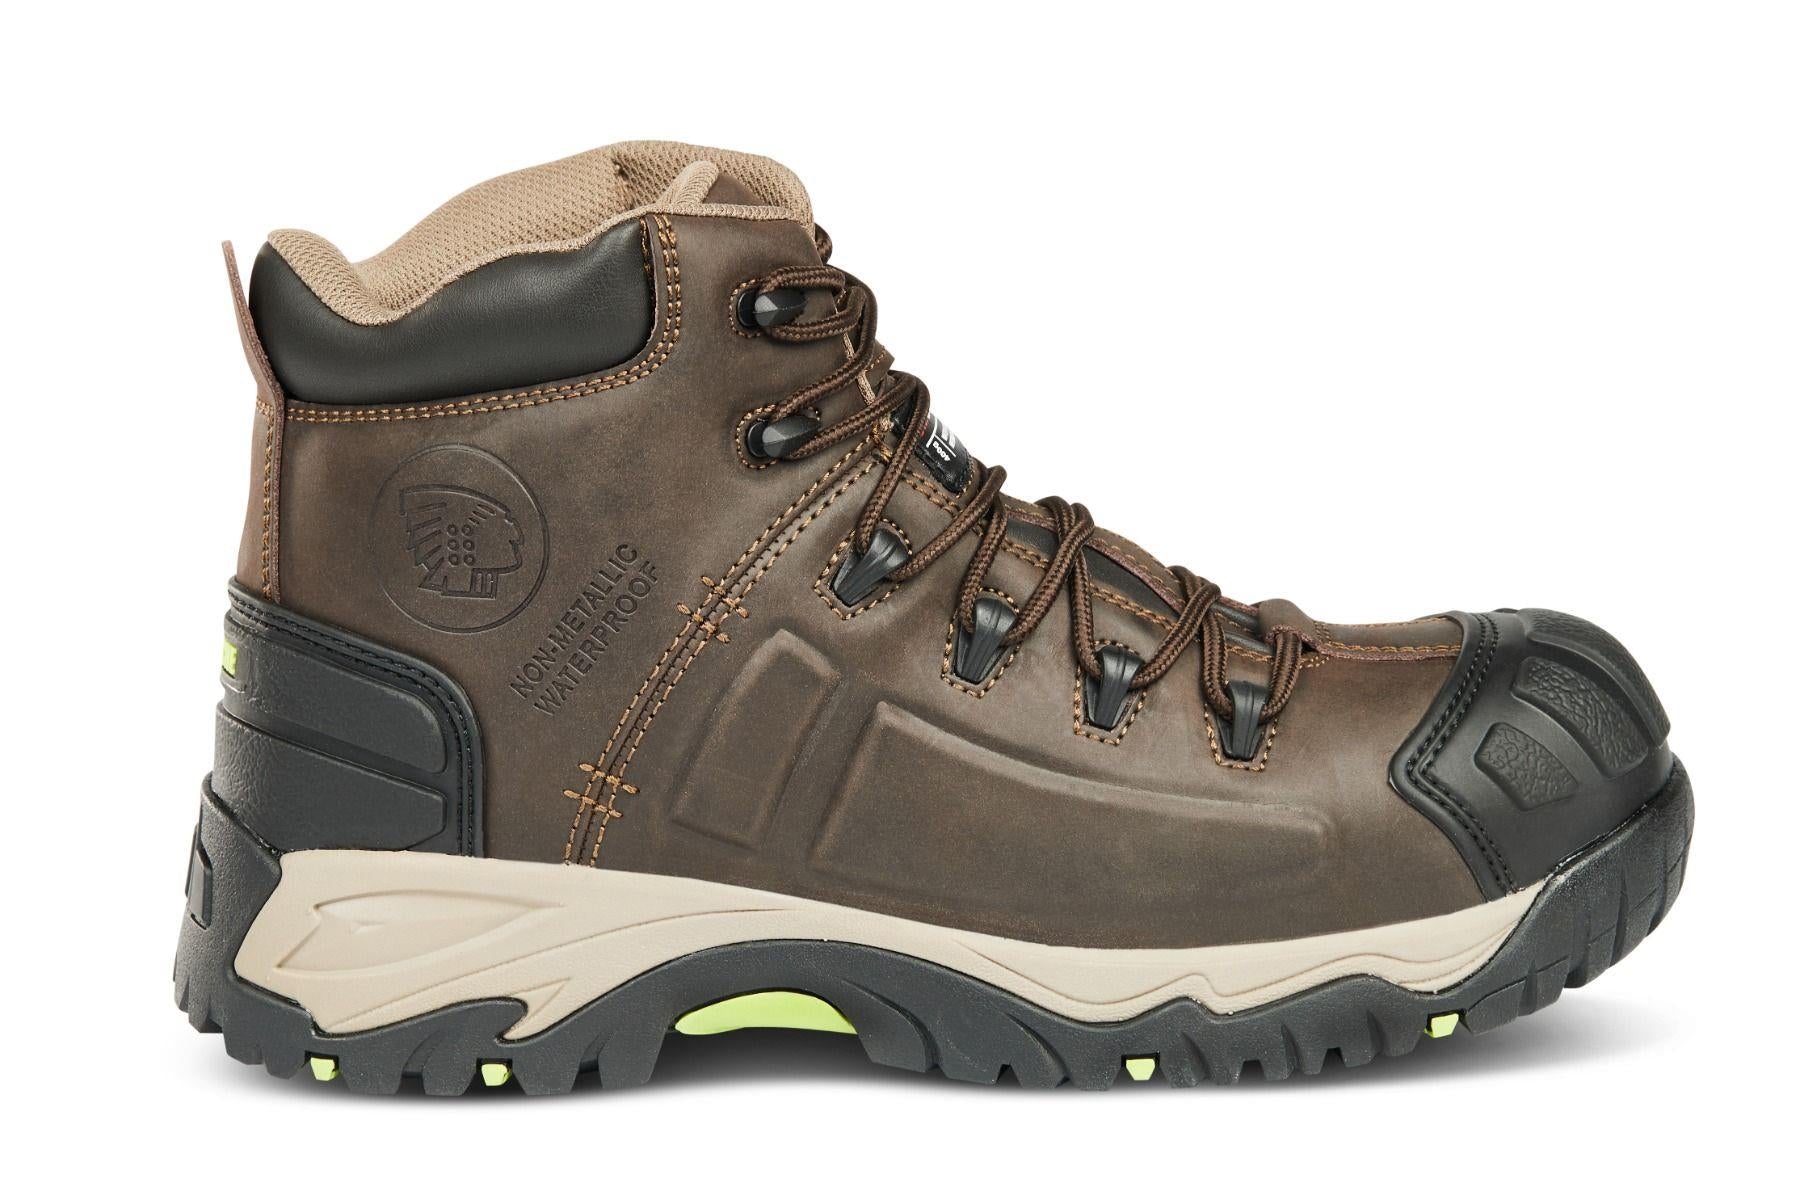 Apache Neptune S3 brown waterproof composite toe/midsole work safety boots